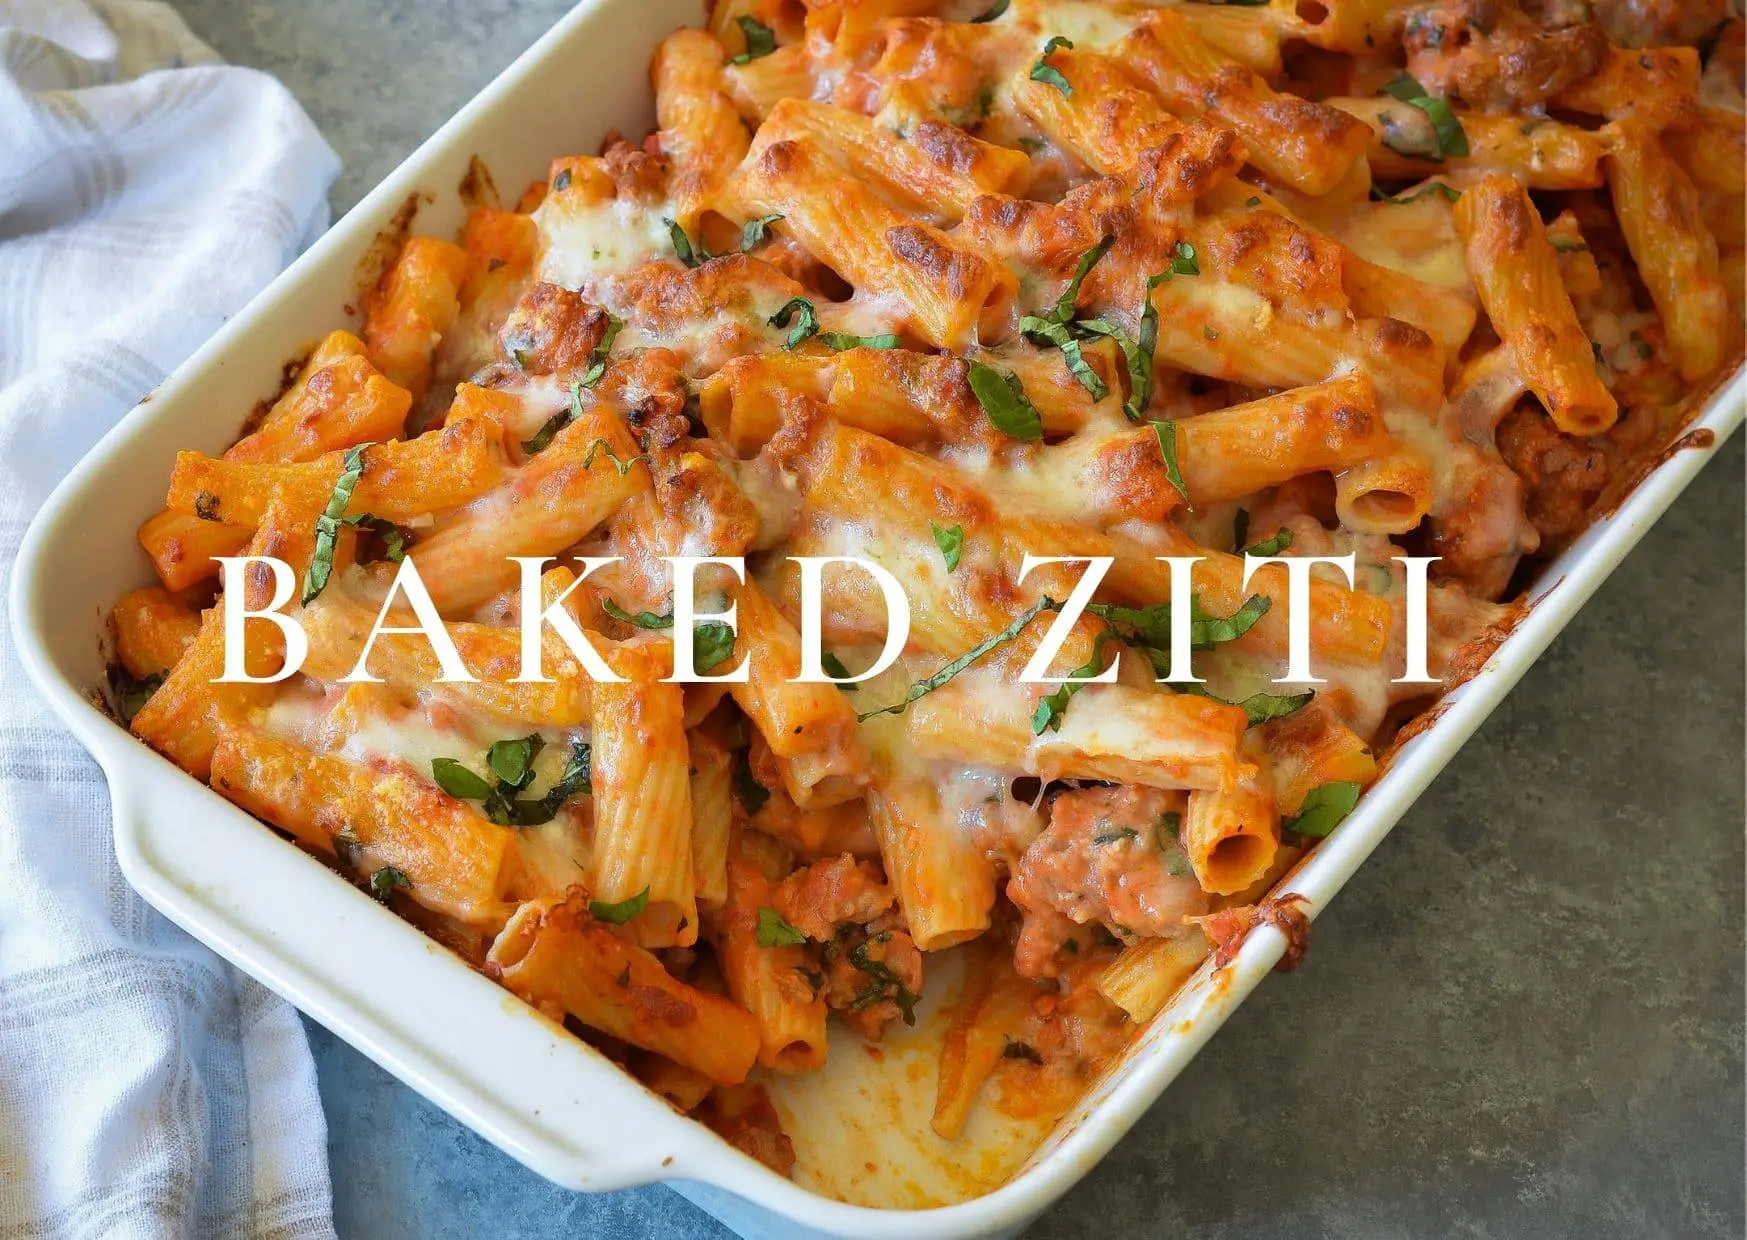 All About Baked Ziti With 4 Easy Steps To A Tasty Treat!